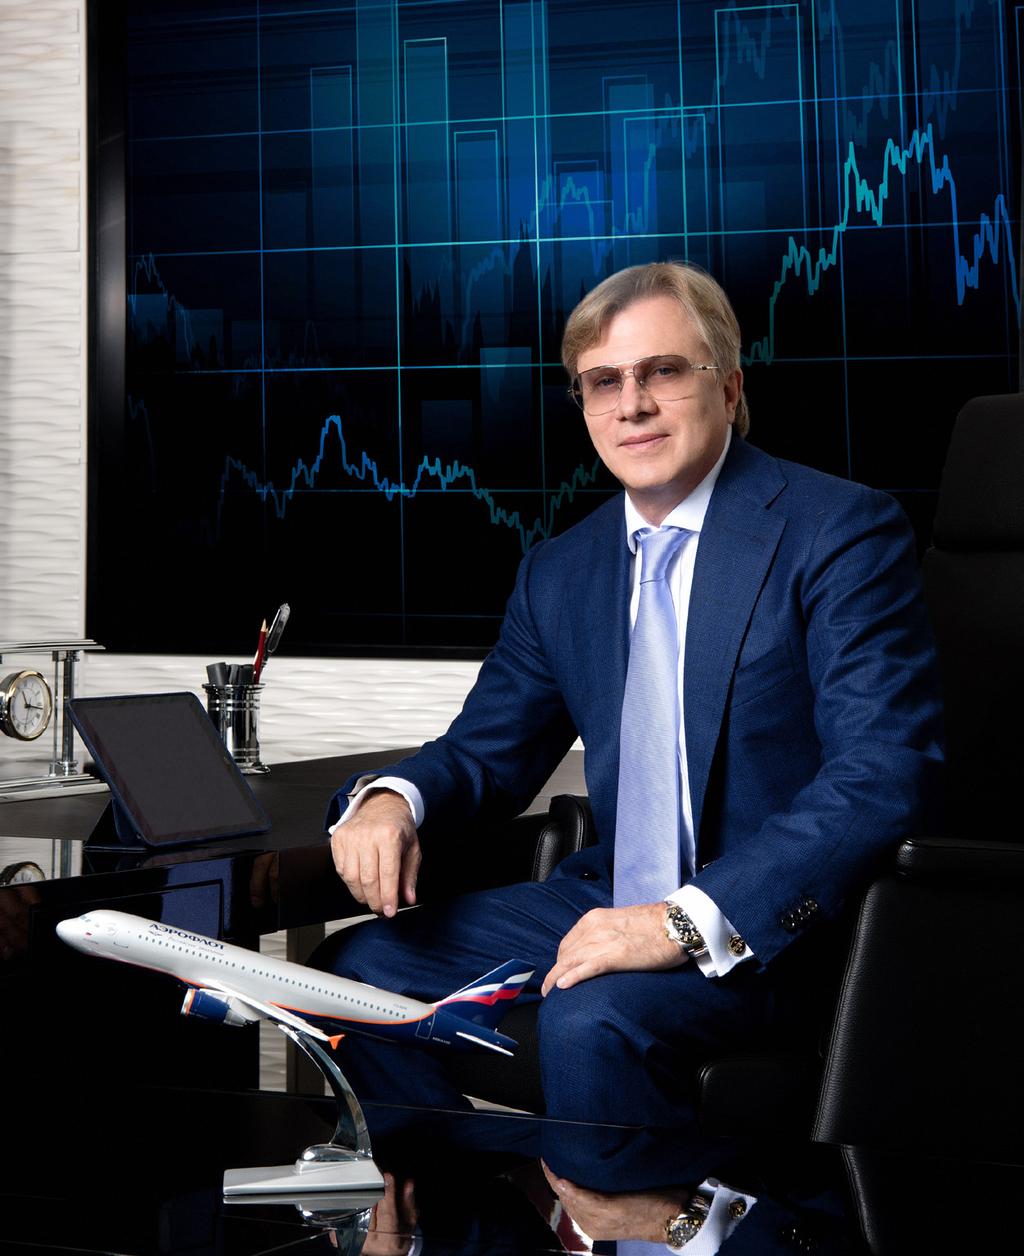 20 Chief Executive Officer s Statement 21 Dear Shareholders, For Aeroflot, 2016 was a year of breakthrough achievements across a number of areas.